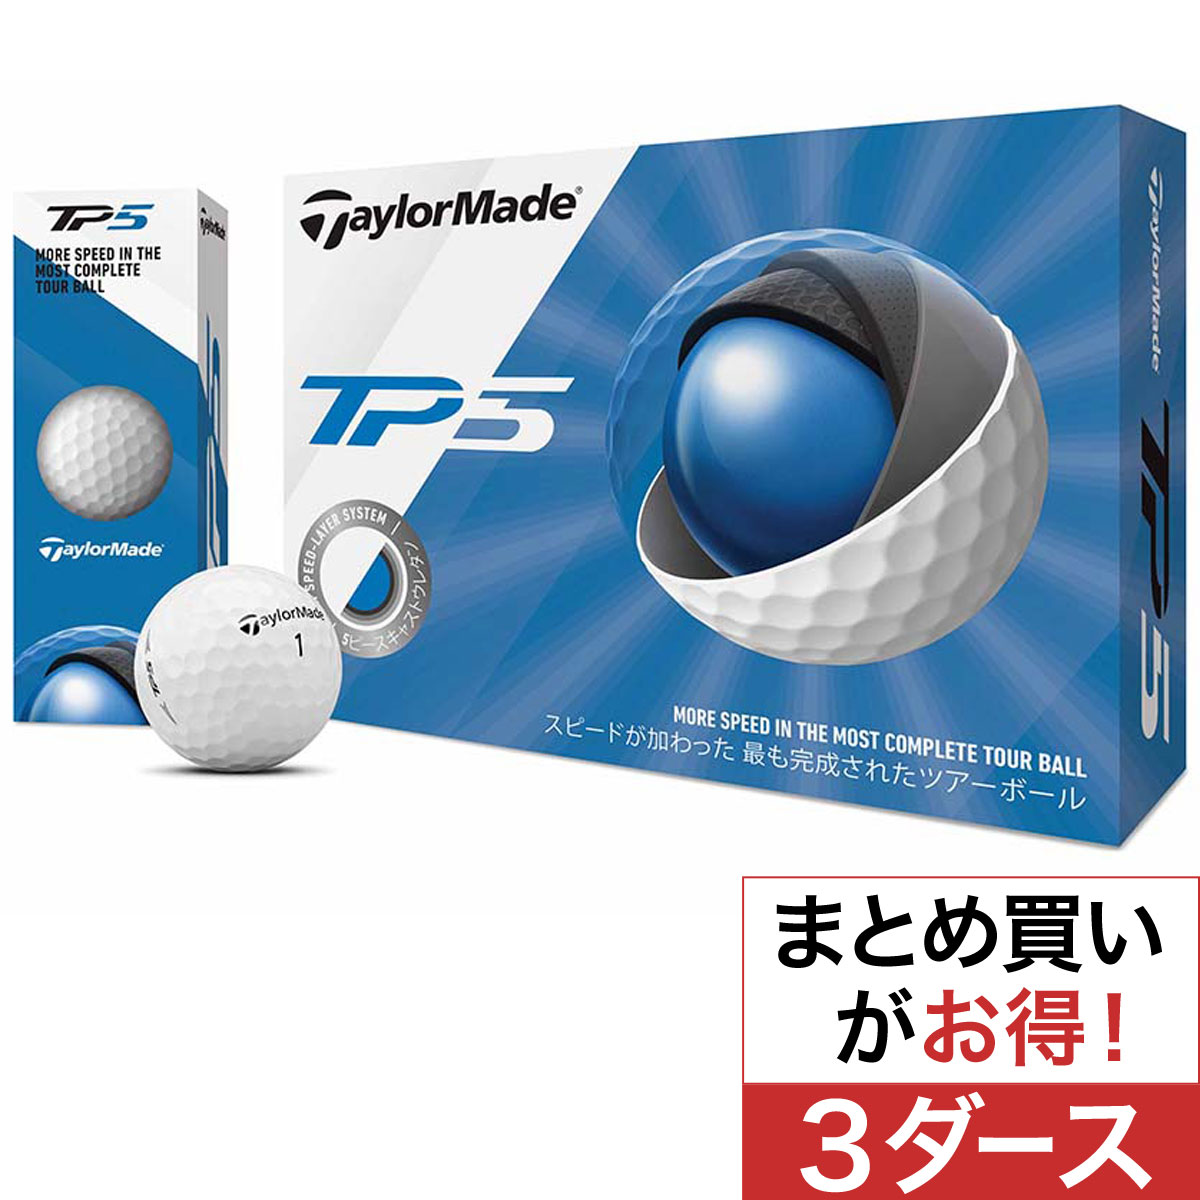  TP5 ボール 3ダースセット 